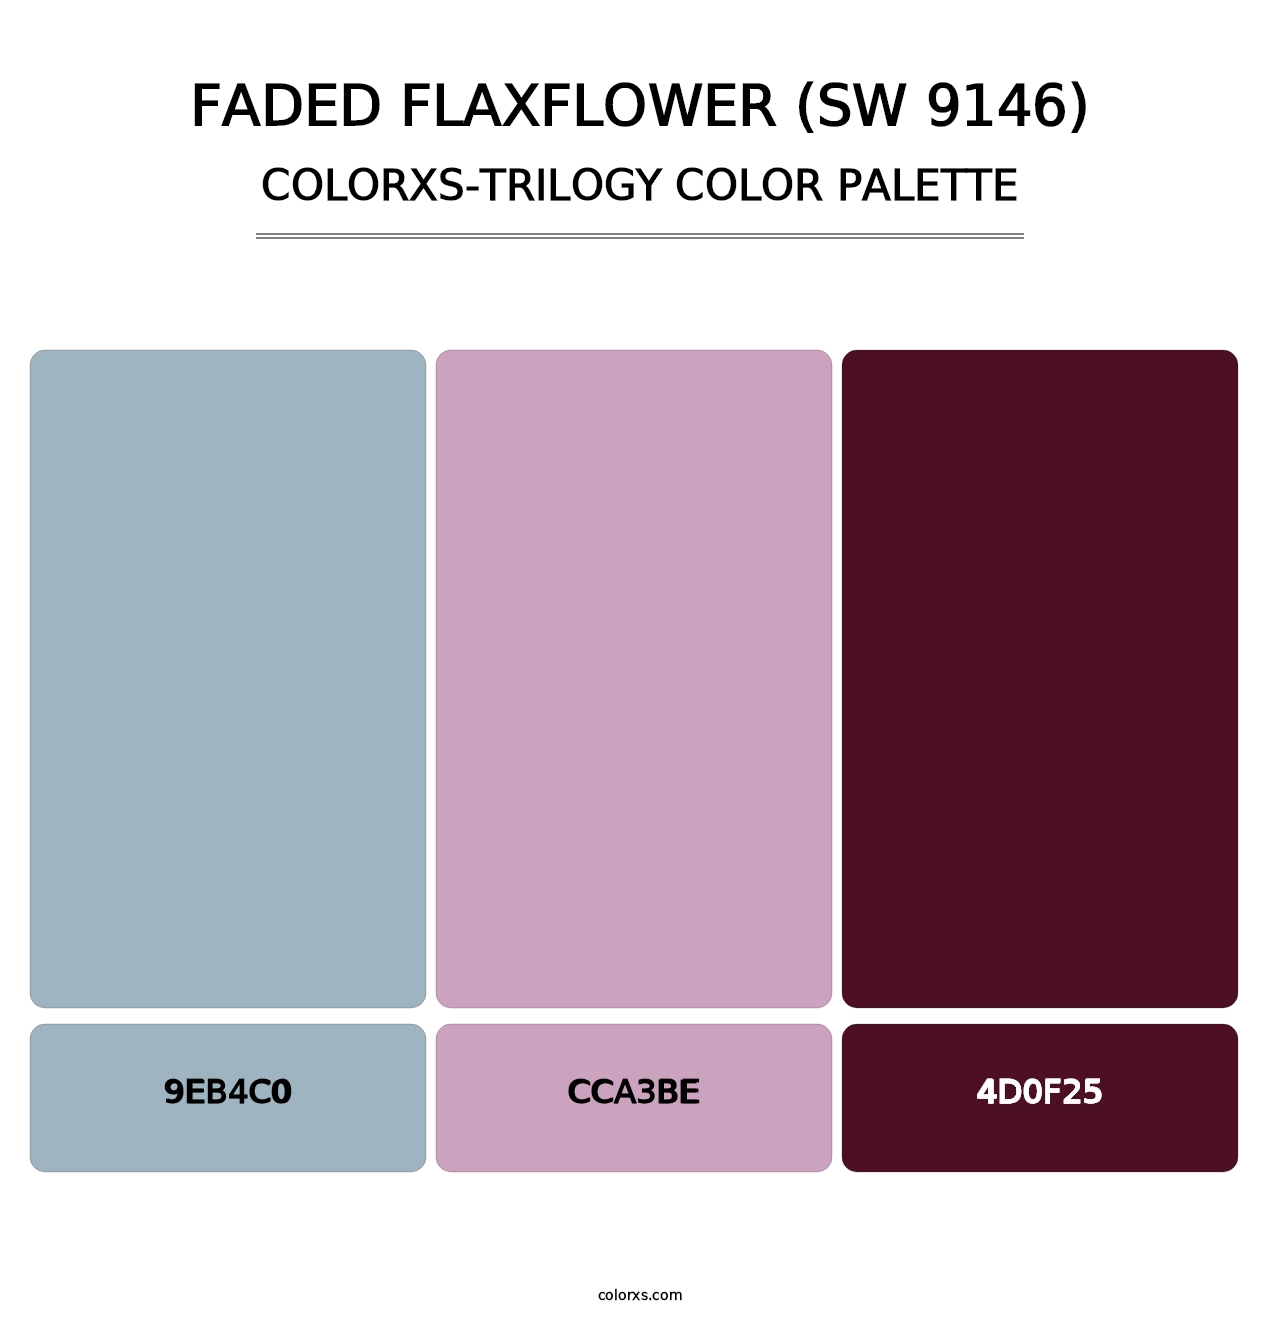 Faded Flaxflower (SW 9146) - Colorxs Trilogy Palette